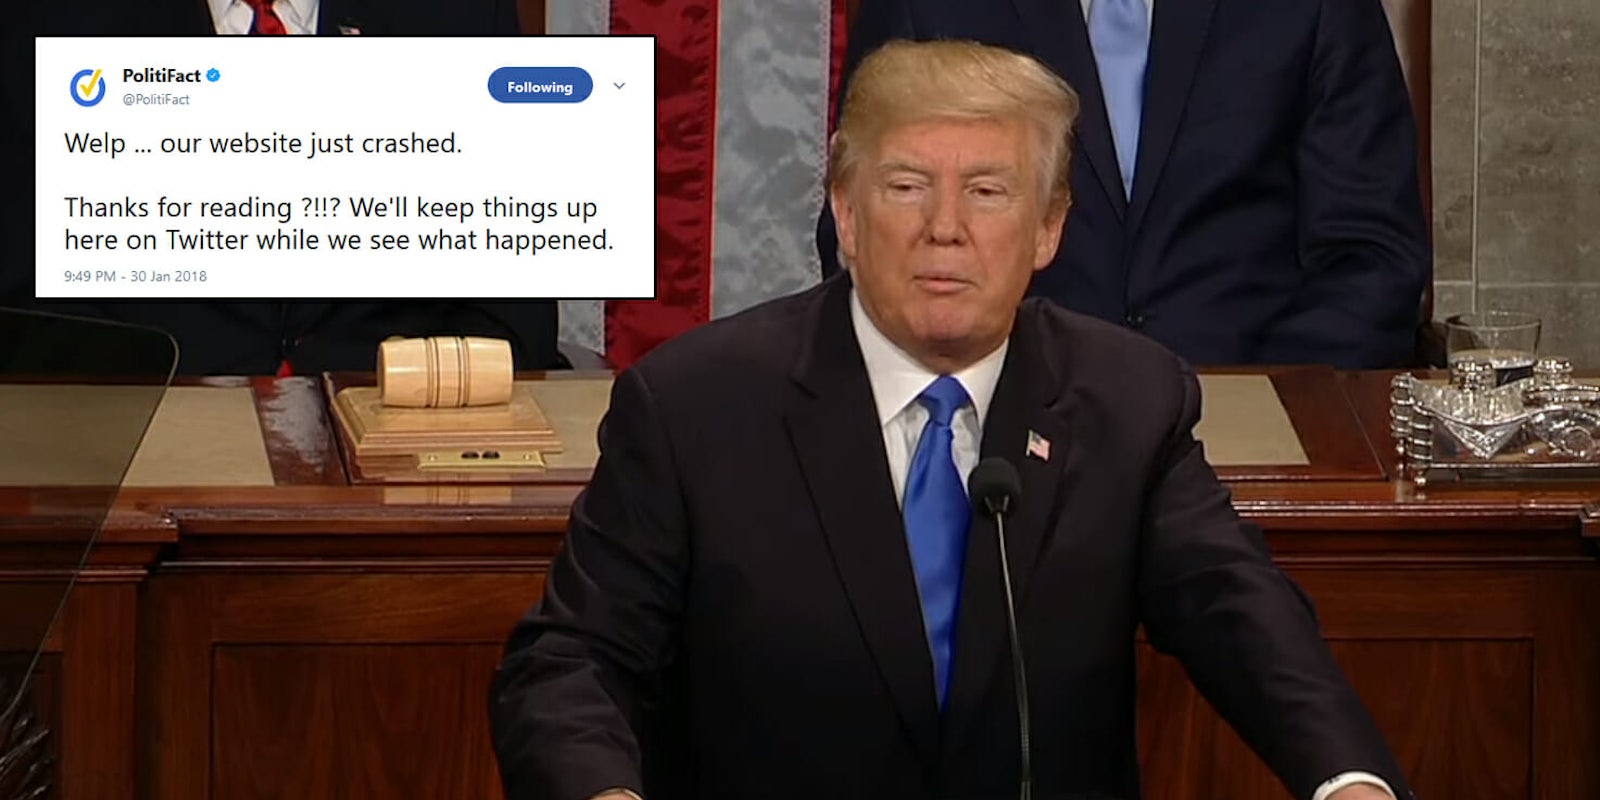 The popular political fact checking website Politifact crashed during President Donald Trump's State of the Union address on Tuesday night. 